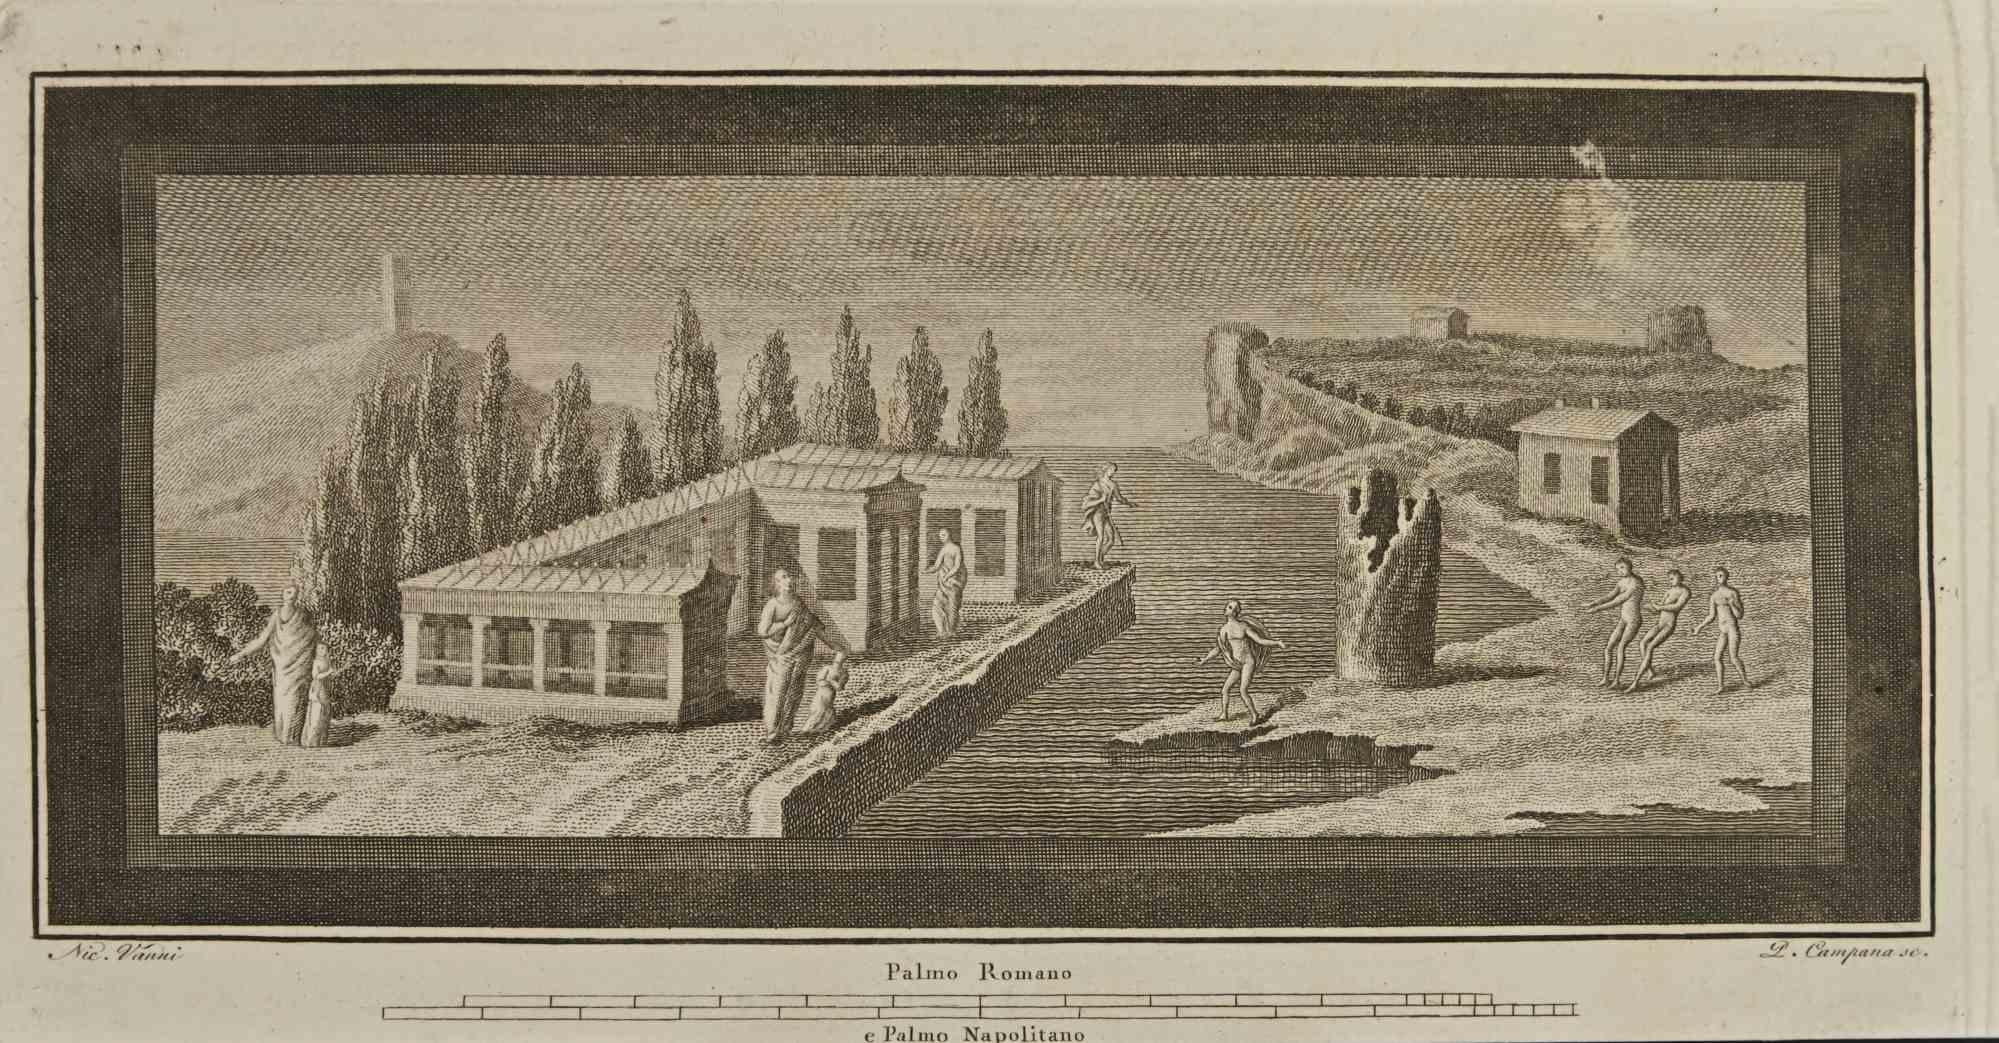 Flood In Ancient Roman Village from "Antiquities of Herculaneum" is an etching on paper realized by Pietro Campana in the 18th Century.

Signed on the plate.

Good conditions.

The etching belongs to the print suite “Antiquities of Herculaneum